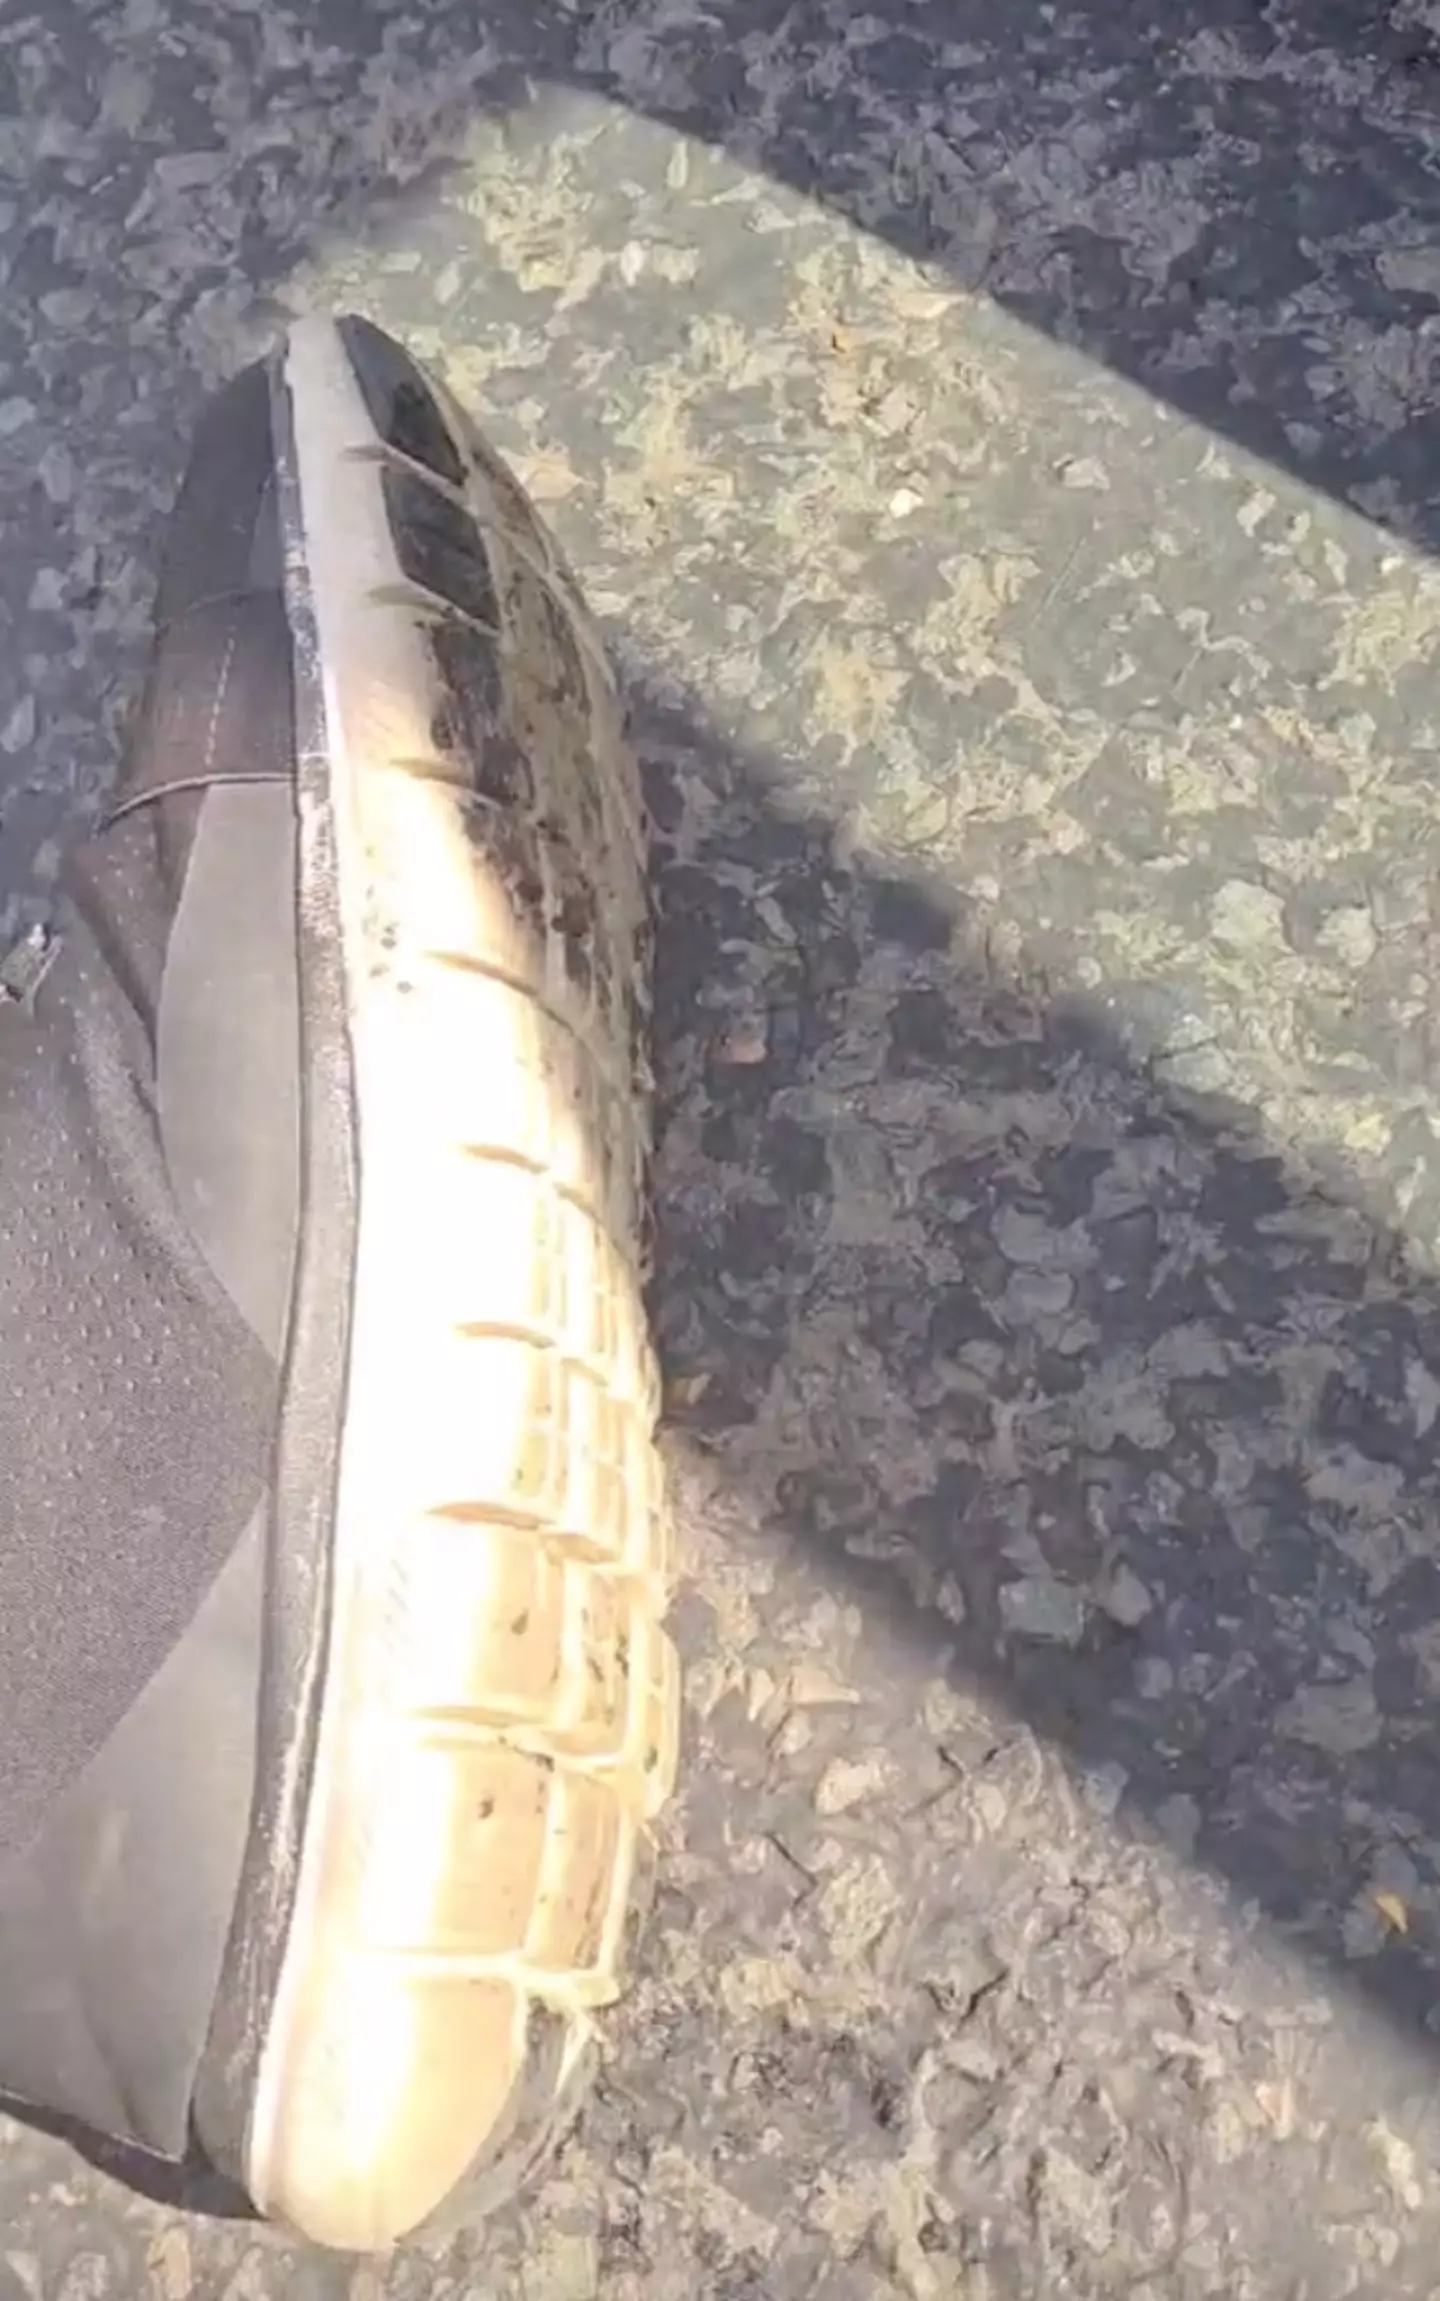 Another woman got melted tarmac on her trainers.